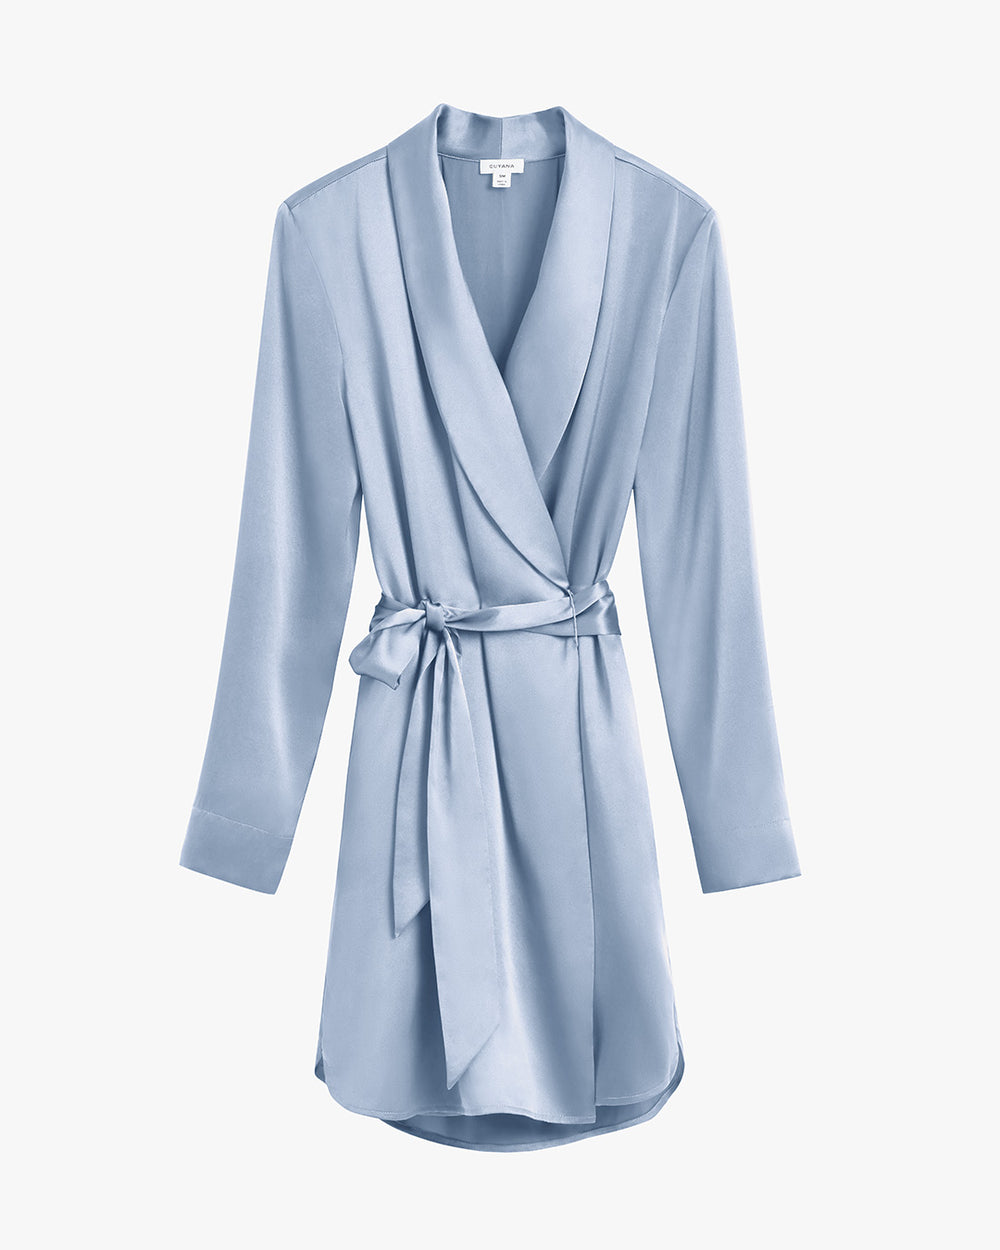 Bathrobe with a belt, hanging against a plain background.